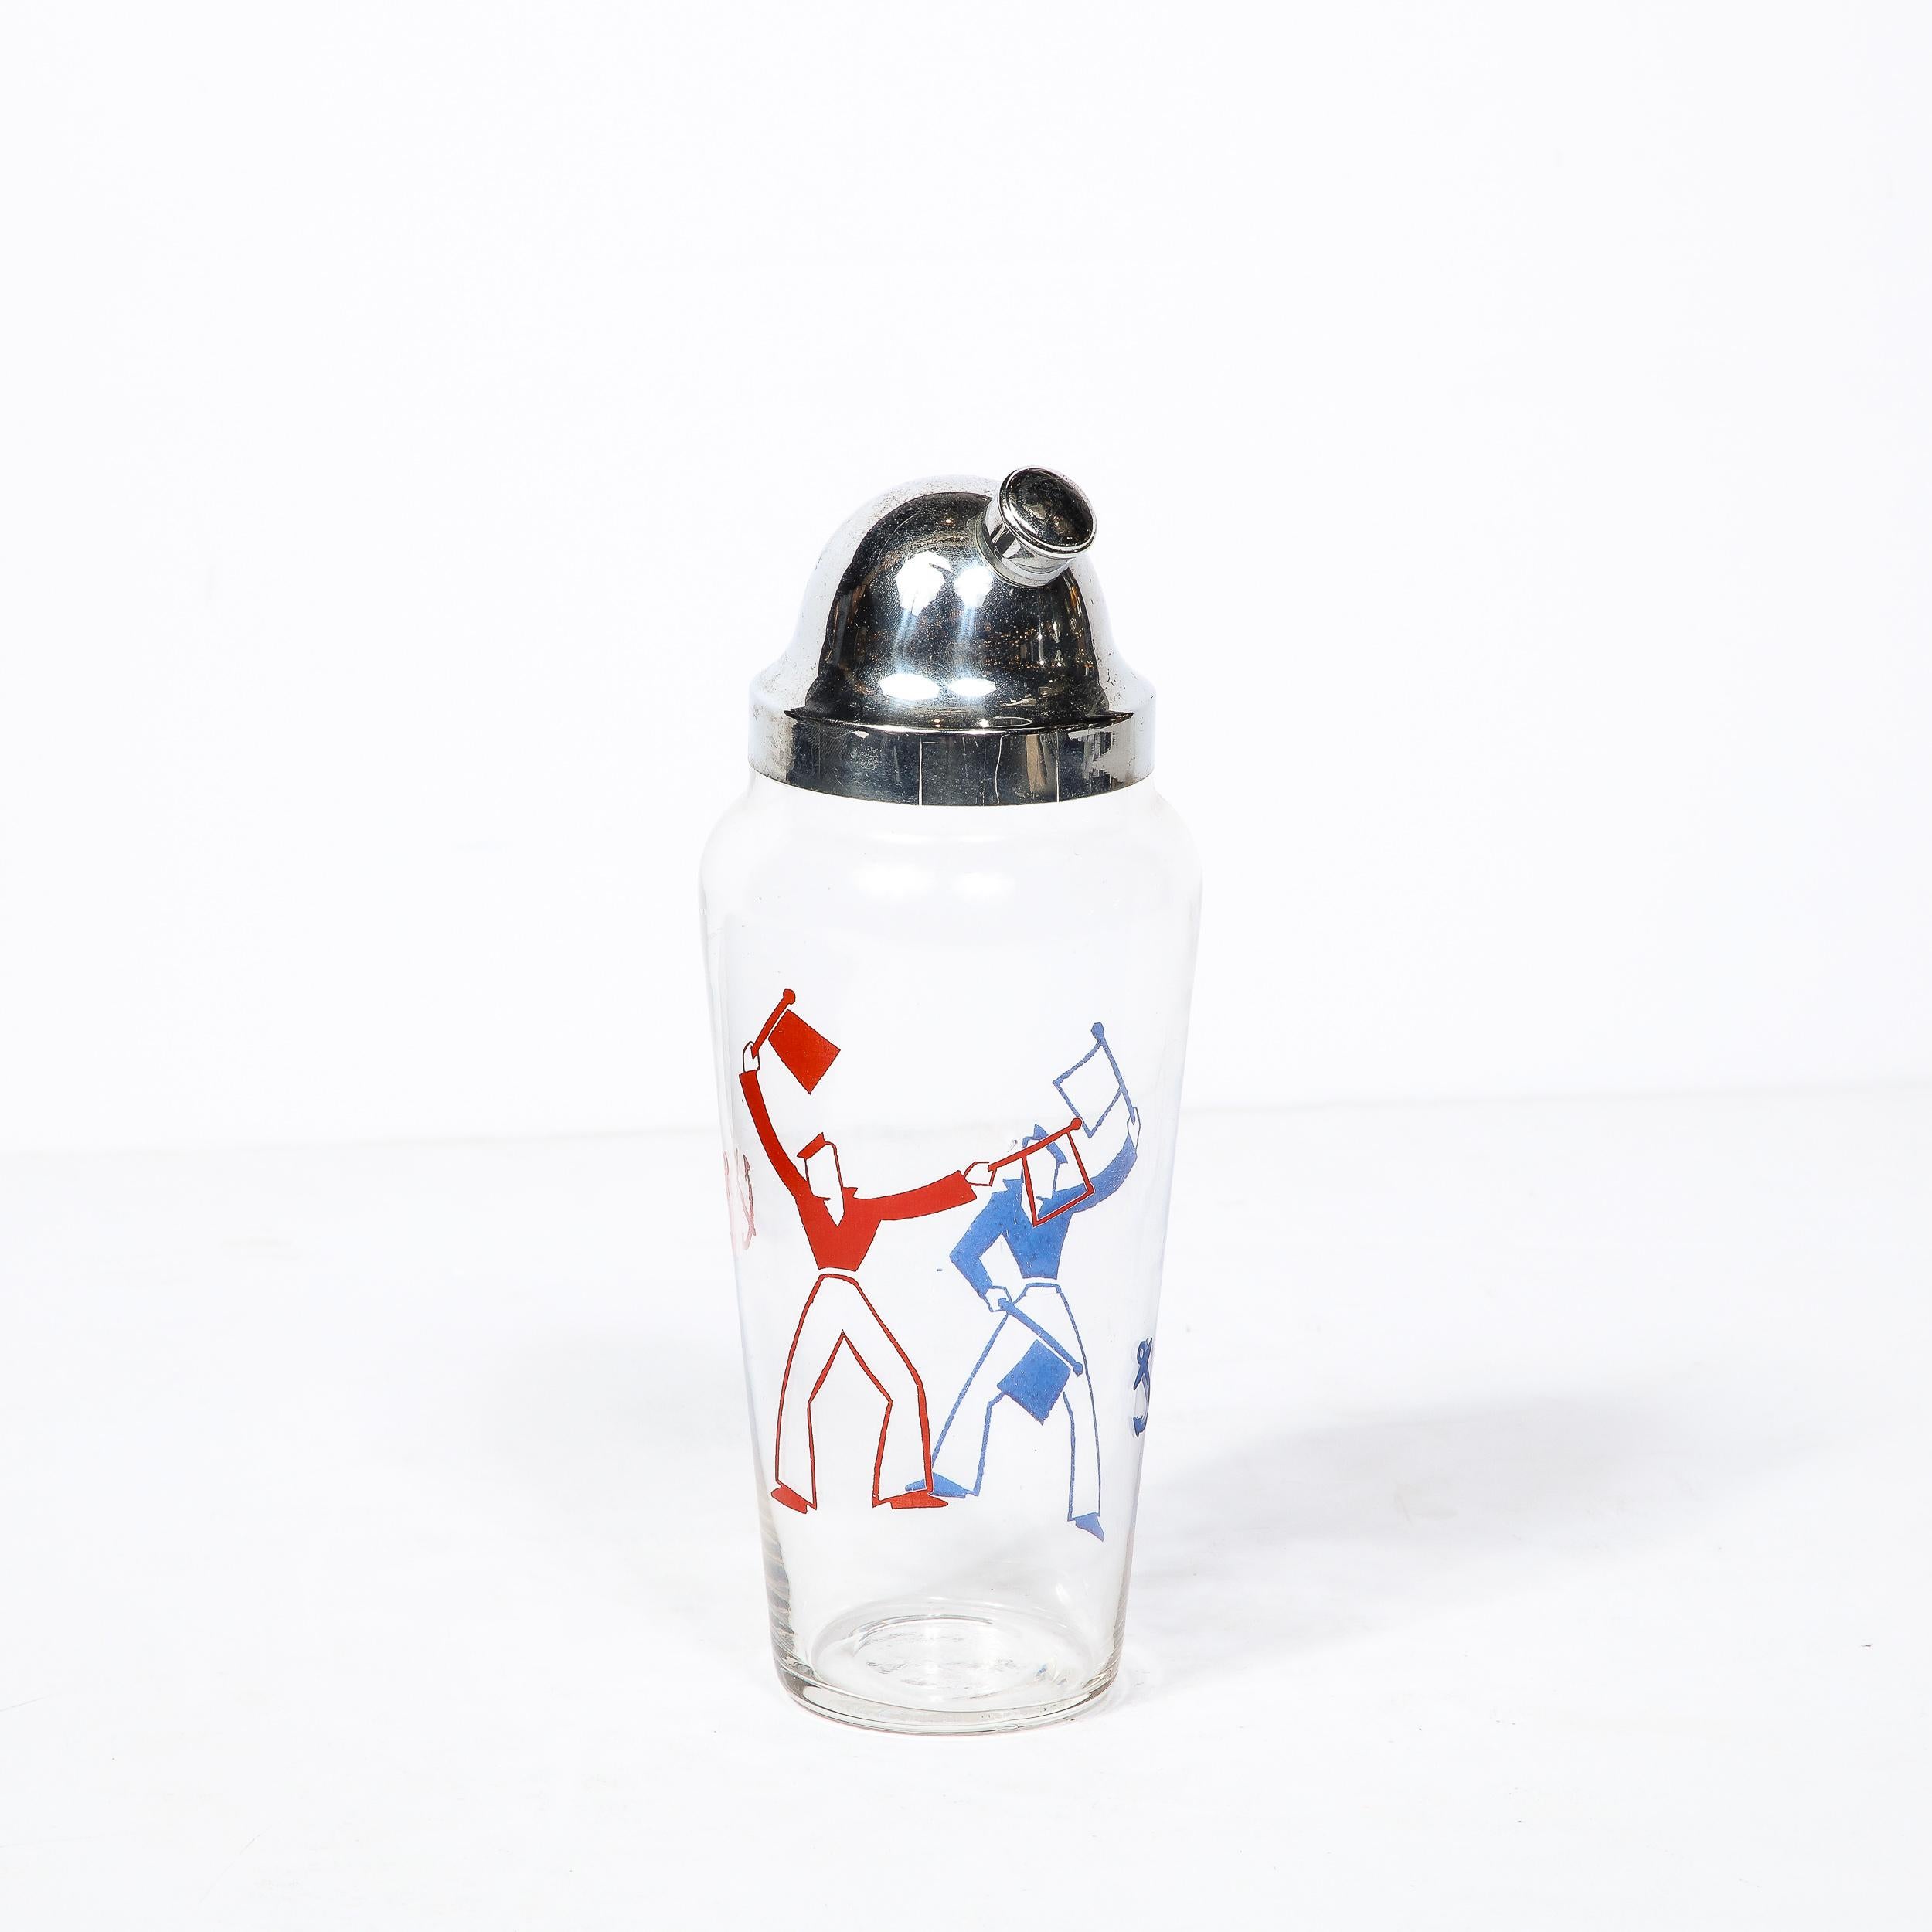 Art Deco Whimsical Cocktail Shaker in Chrome with Sailors in Red and Blue  1